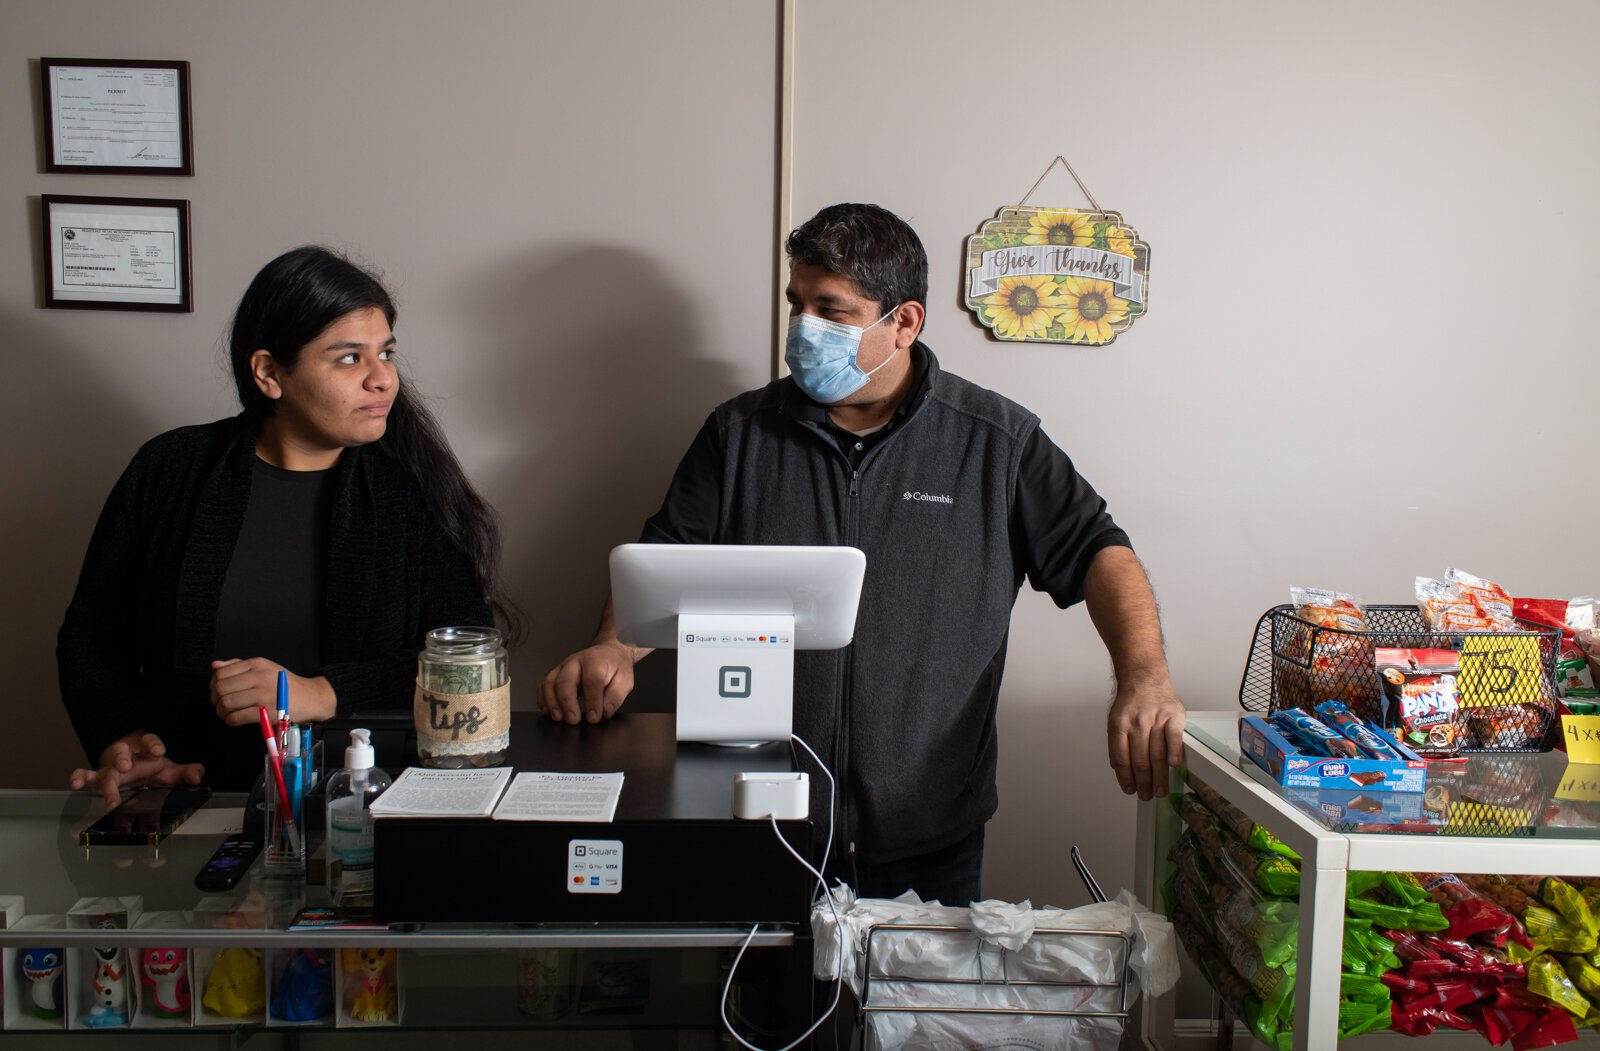 Judith Peña and her father Carlos Peña work together inside their shop Zion, 2312 S. Calhoun St.